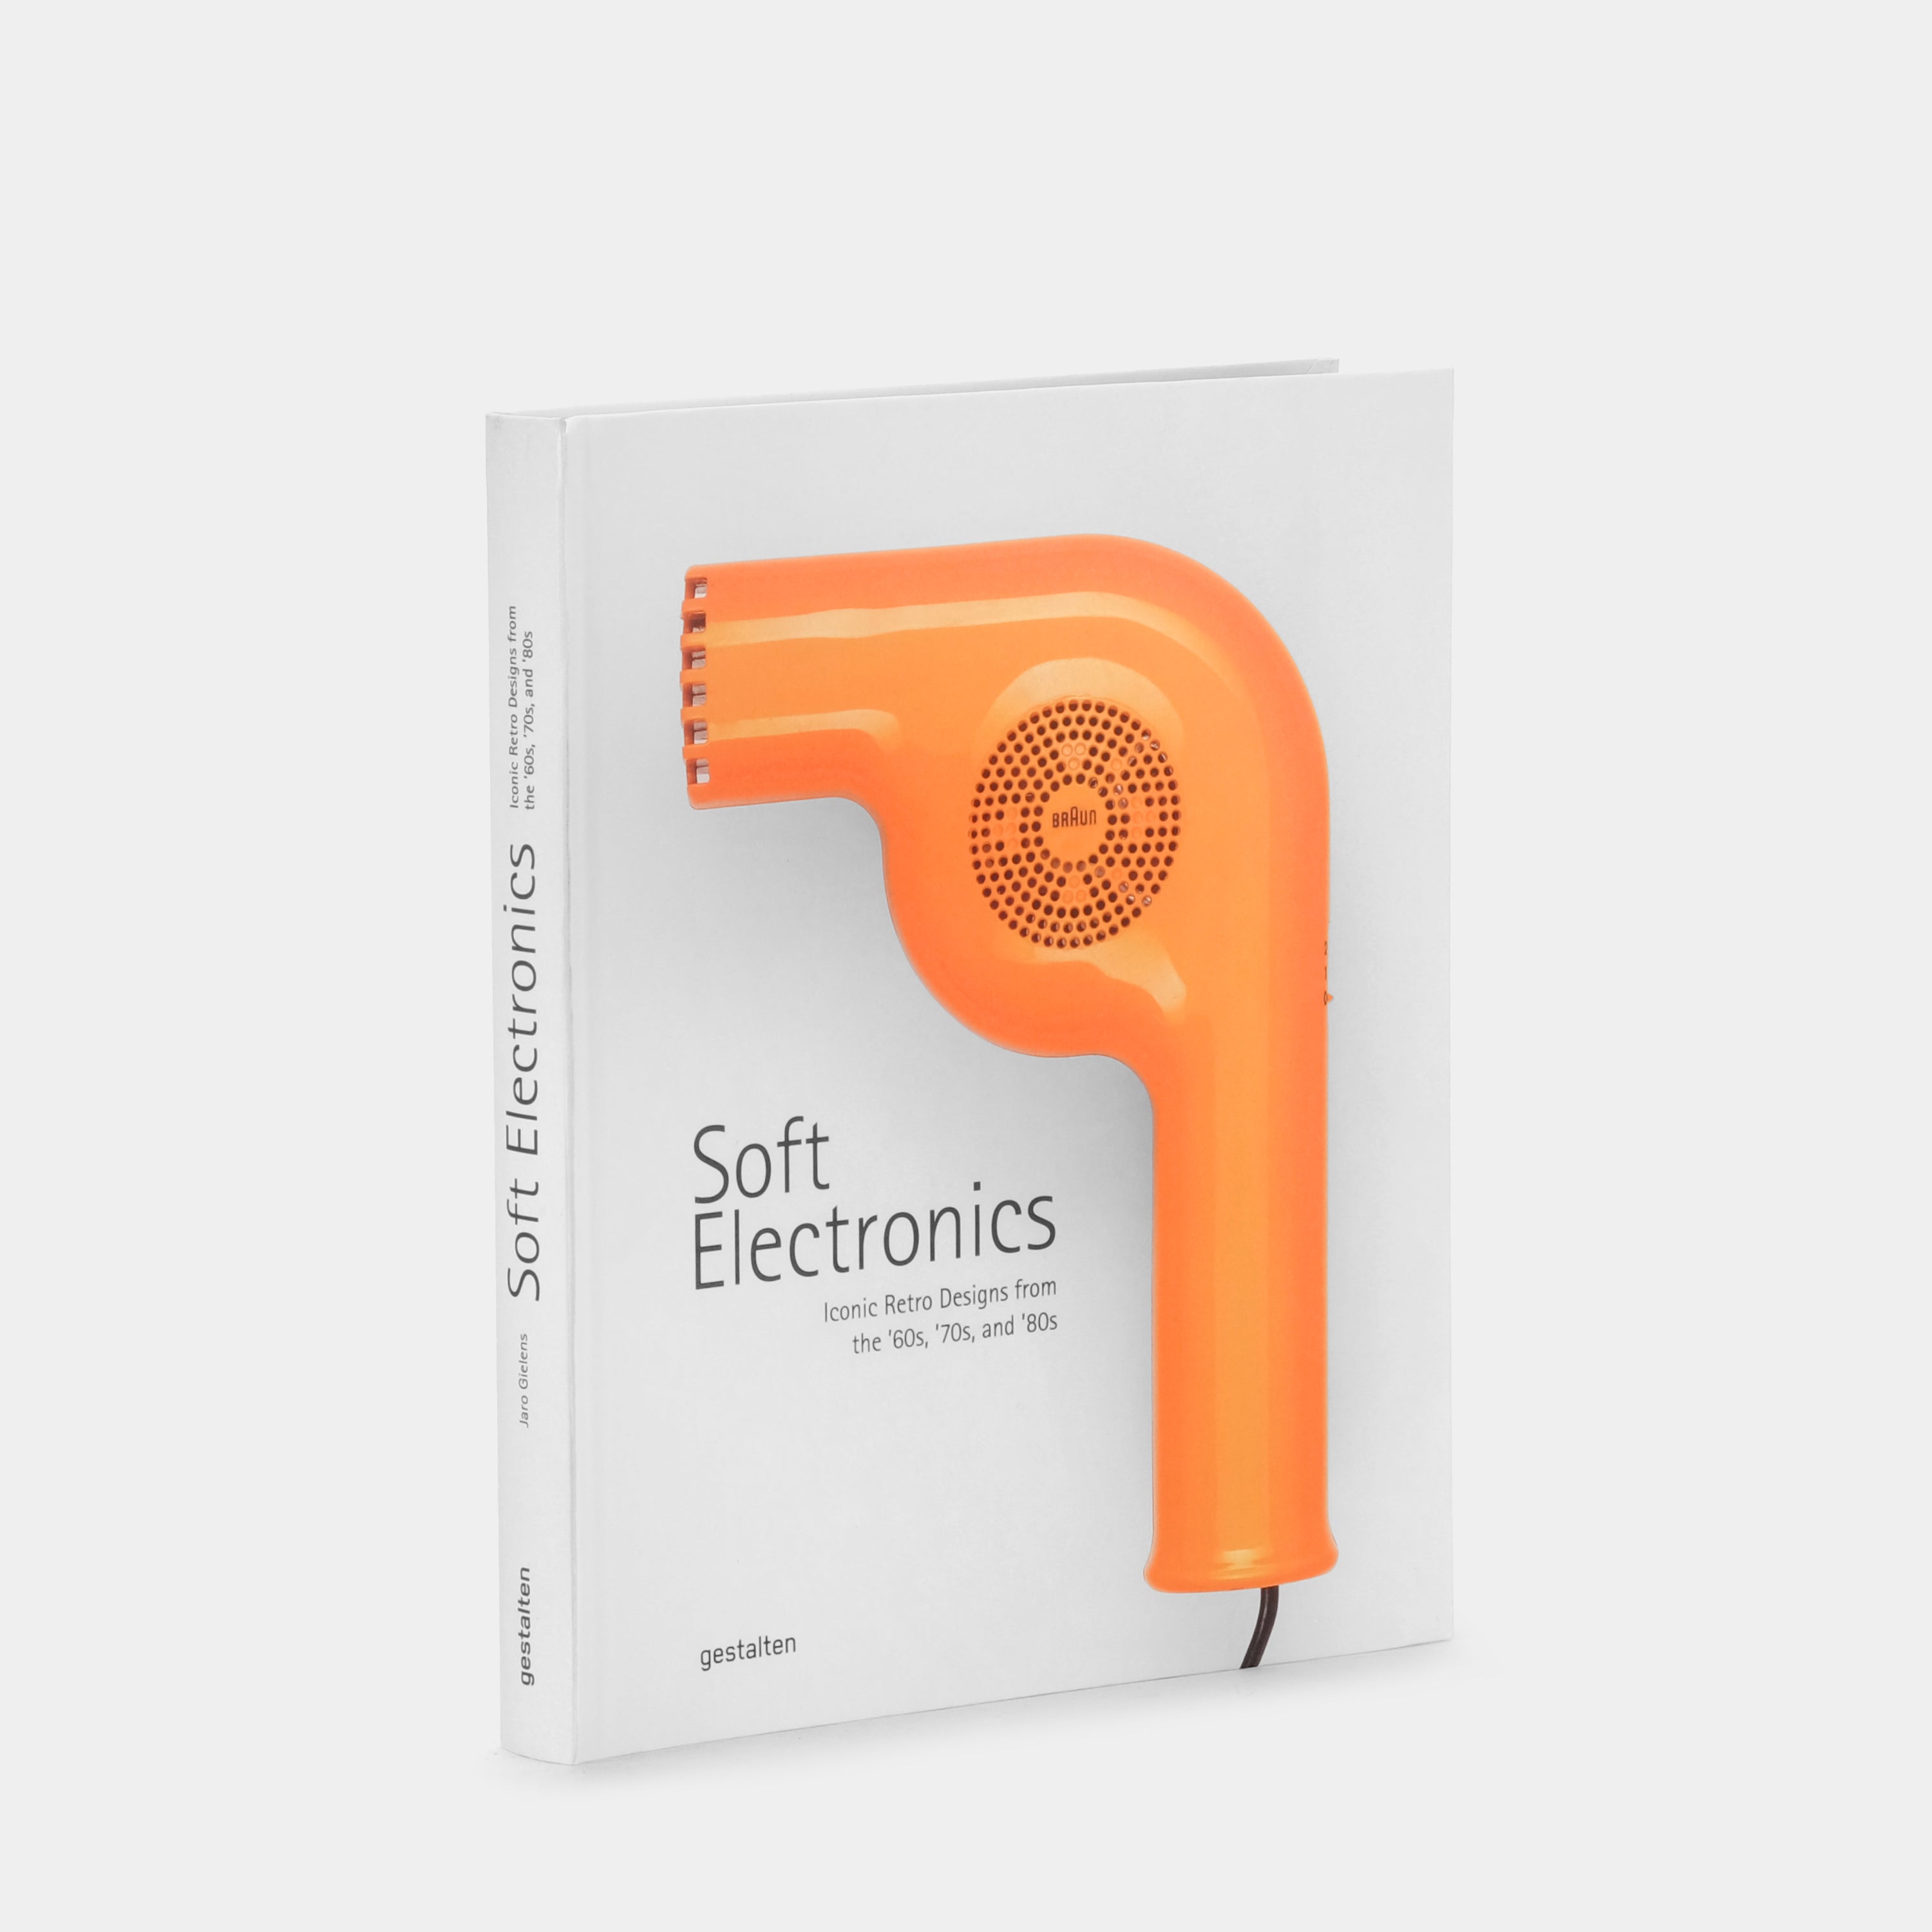 Soft Electronics: Iconic Retro Designs From The ’60s, ’70s, and ’80s Book